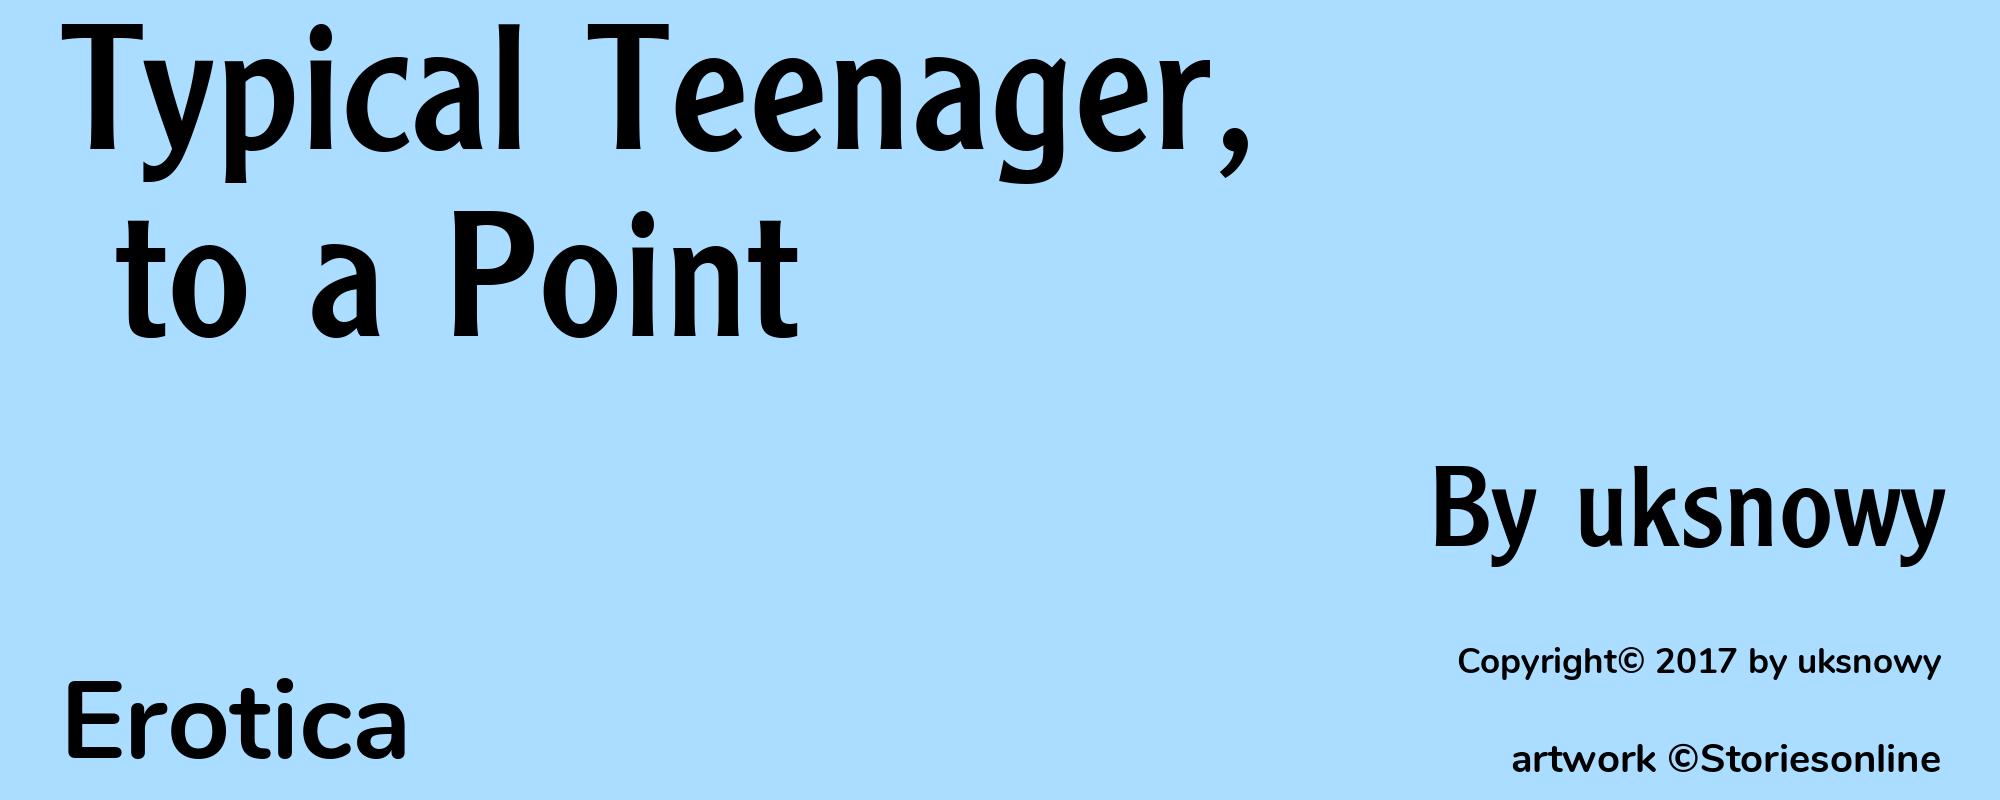 Typical Teenager, to a Point - Cover